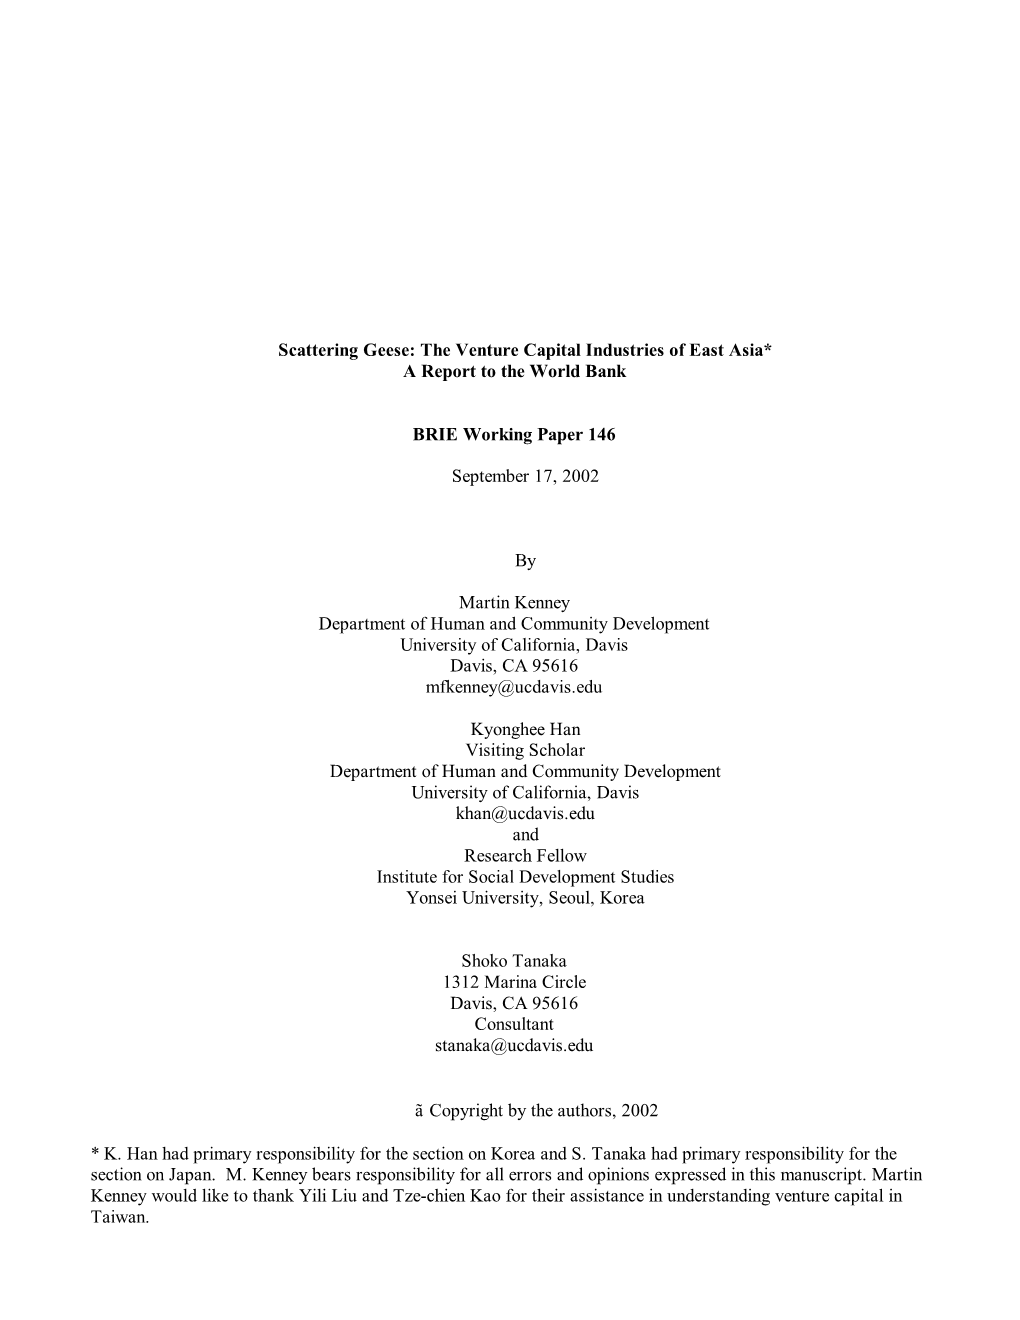 The Venture Capital Industries of East Asia* a Report to the World Bank